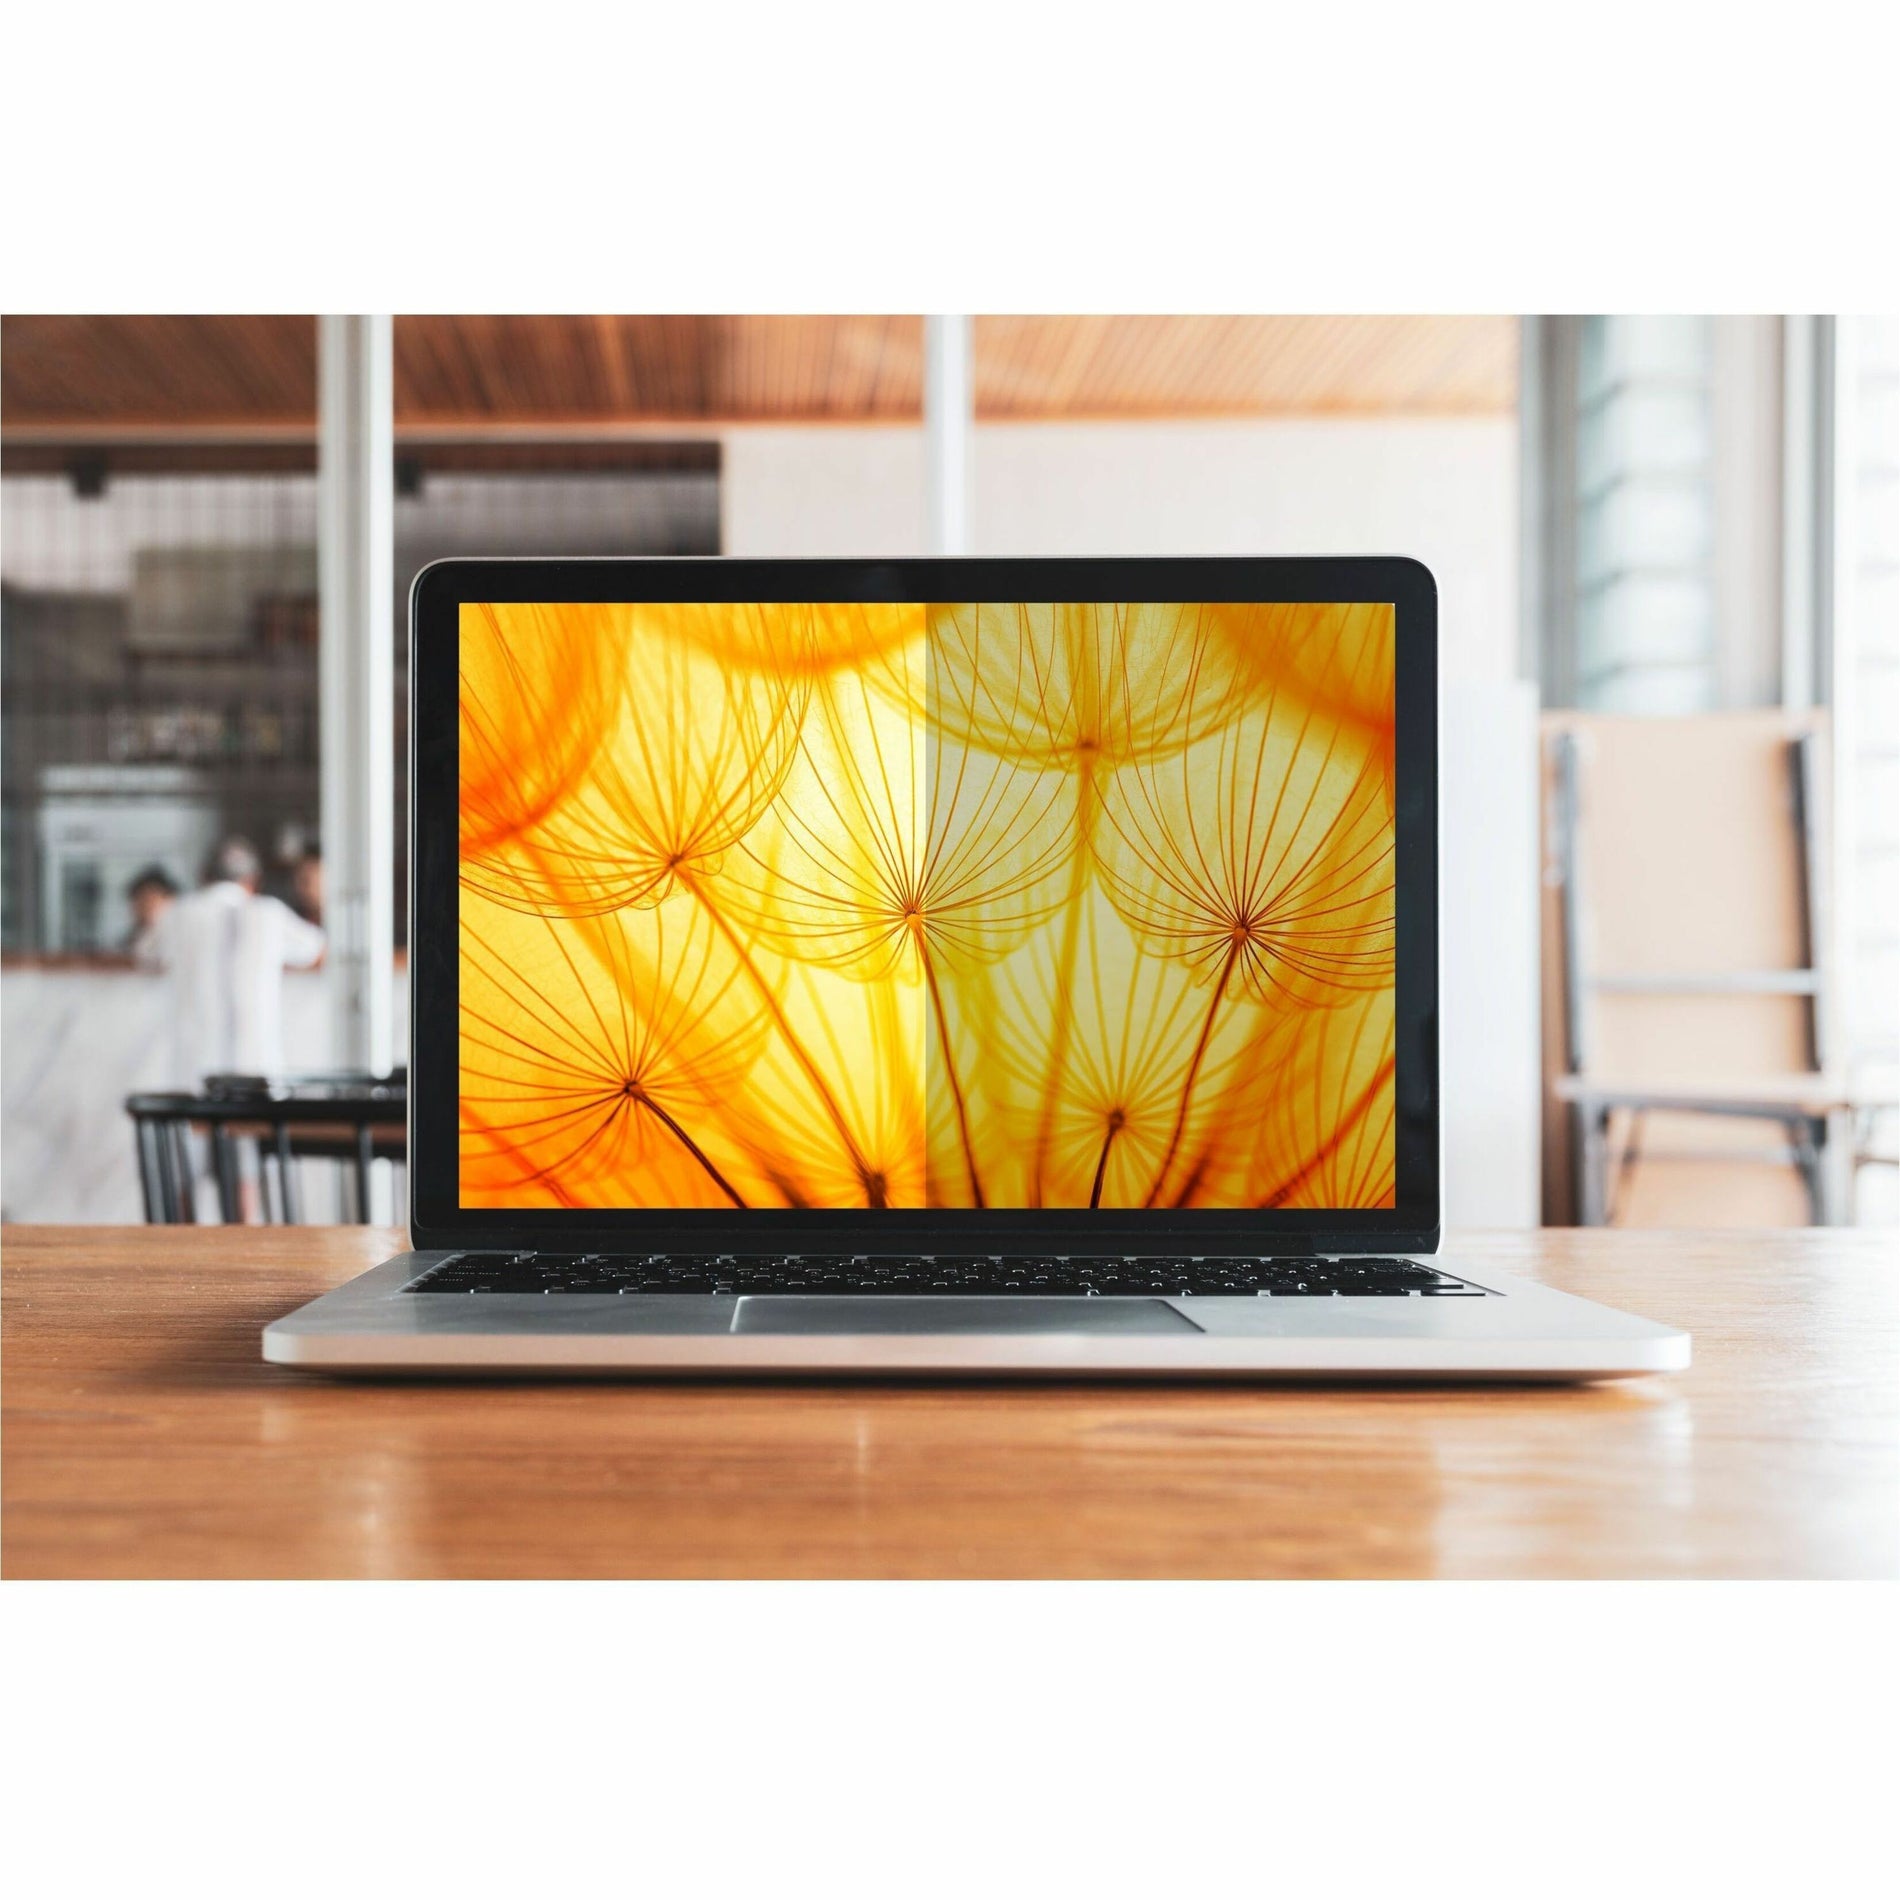 3M BP140W9B Bright Screen Privacy Filter for 14in Laptop, 16:9, Ultra Slim, Blue Light Reduction, Matte Black